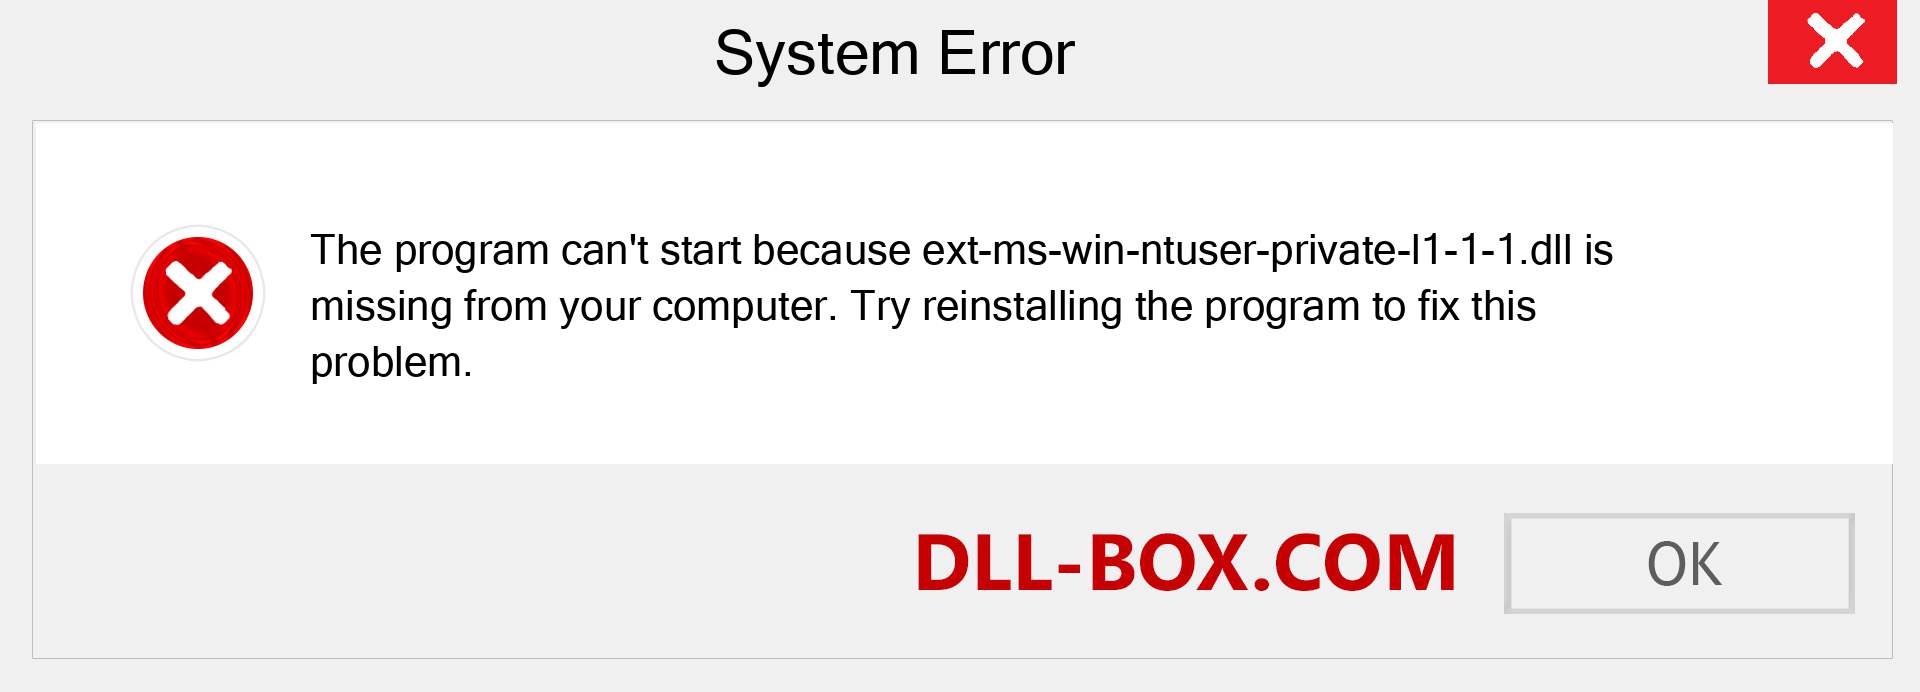  ext-ms-win-ntuser-private-l1-1-1.dll file is missing?. Download for Windows 7, 8, 10 - Fix  ext-ms-win-ntuser-private-l1-1-1 dll Missing Error on Windows, photos, images